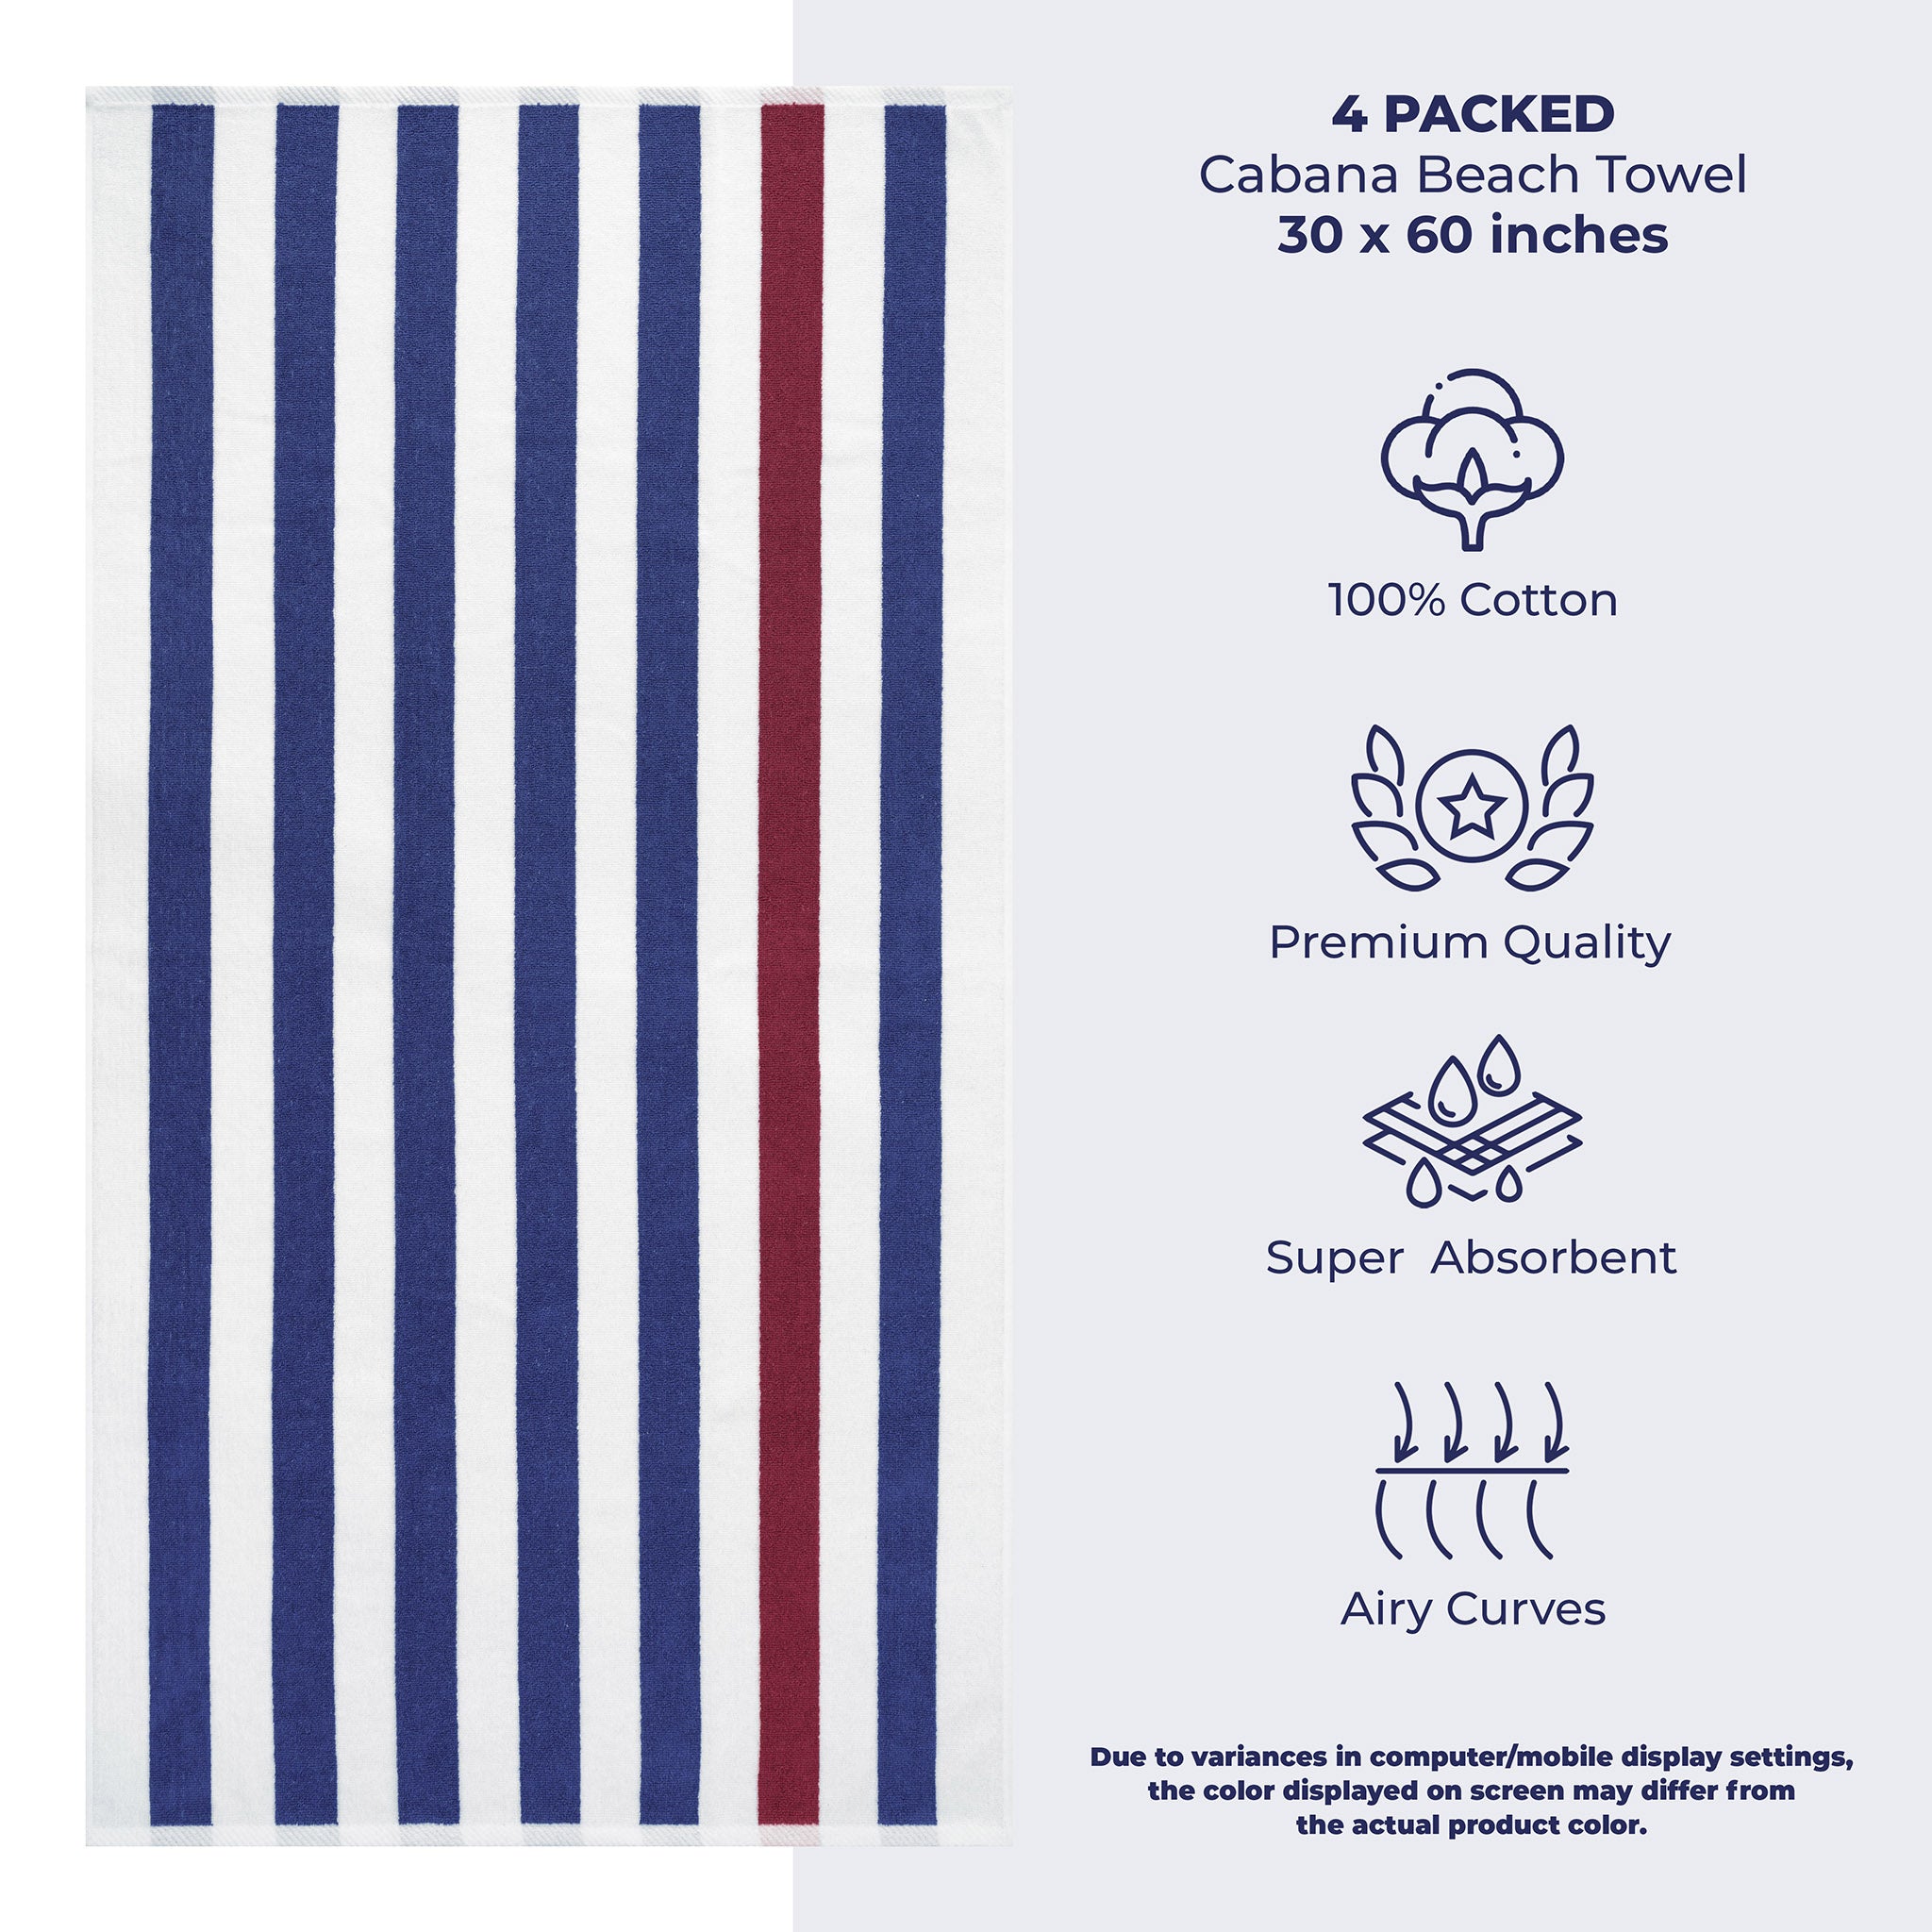 American Soft Linen 100% Cotton 4 Pack Beach Towels Cabana Striped Pool Towels -navy-bordeaux-3